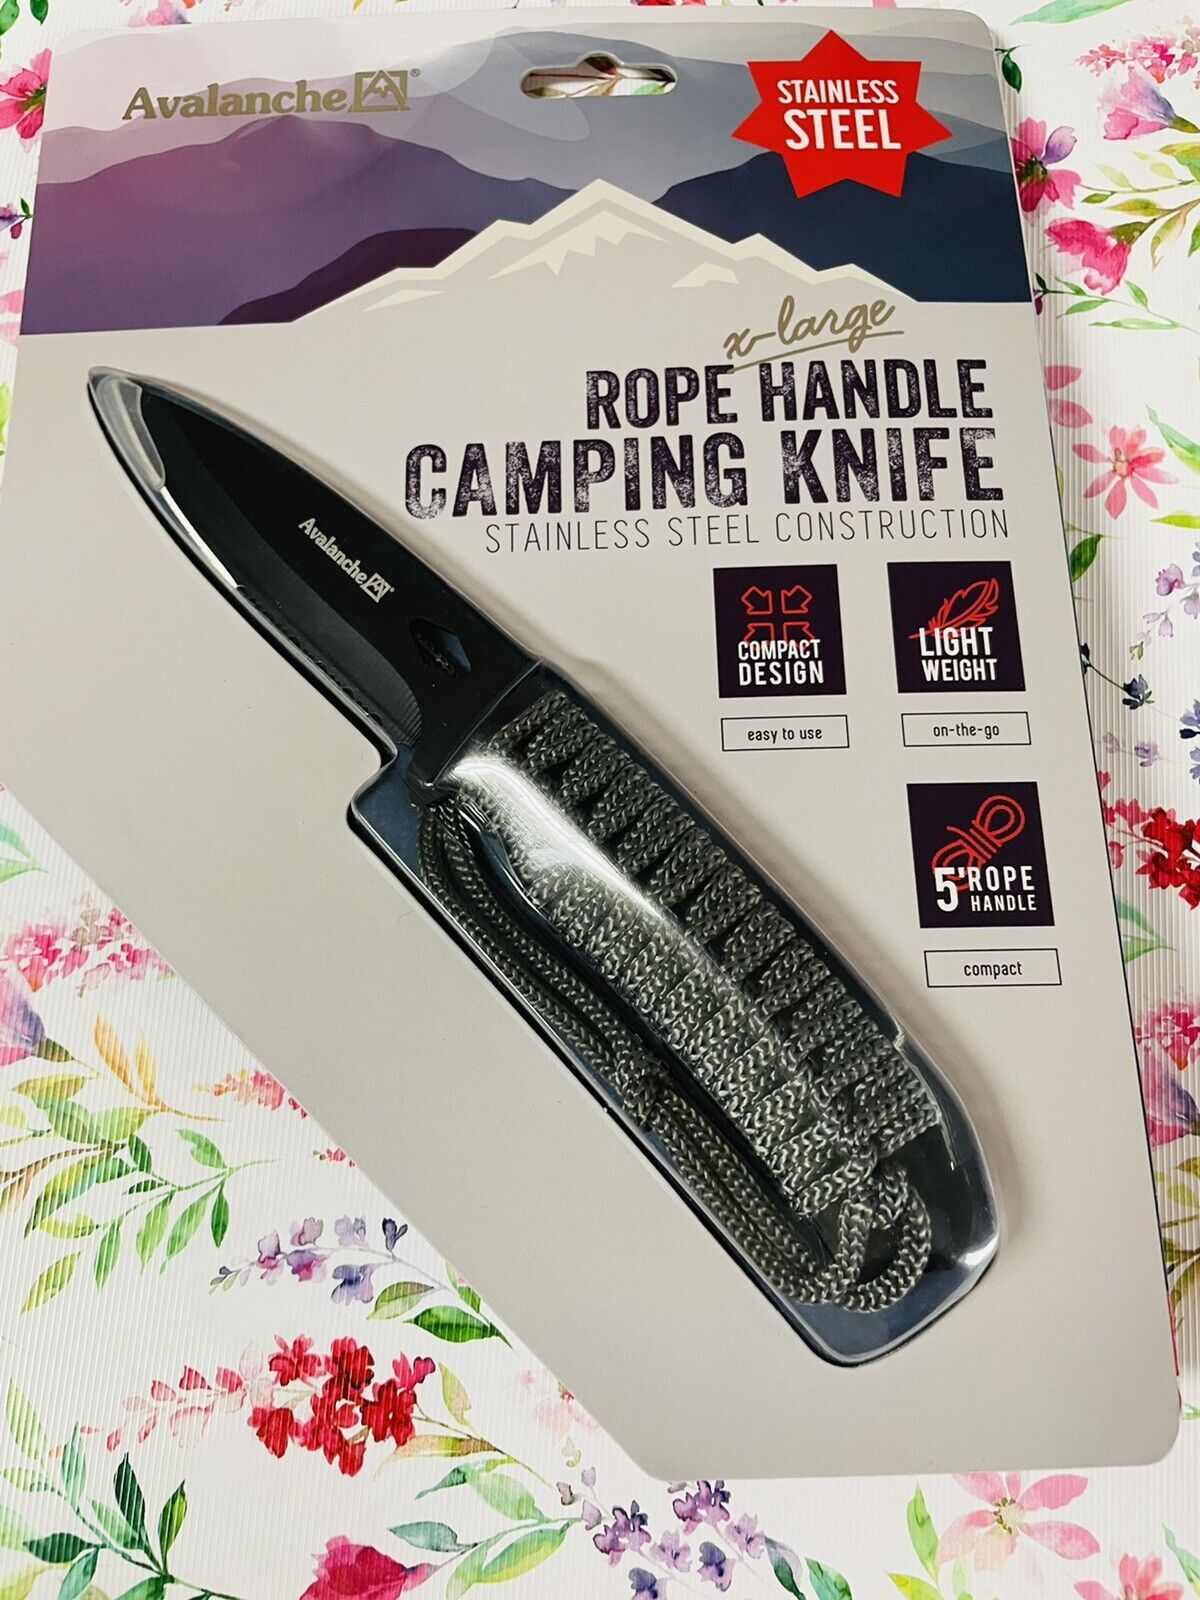 NEW Avalanche XLarge Rope Handle Camping Knife 4” Blade Stainless Steel 